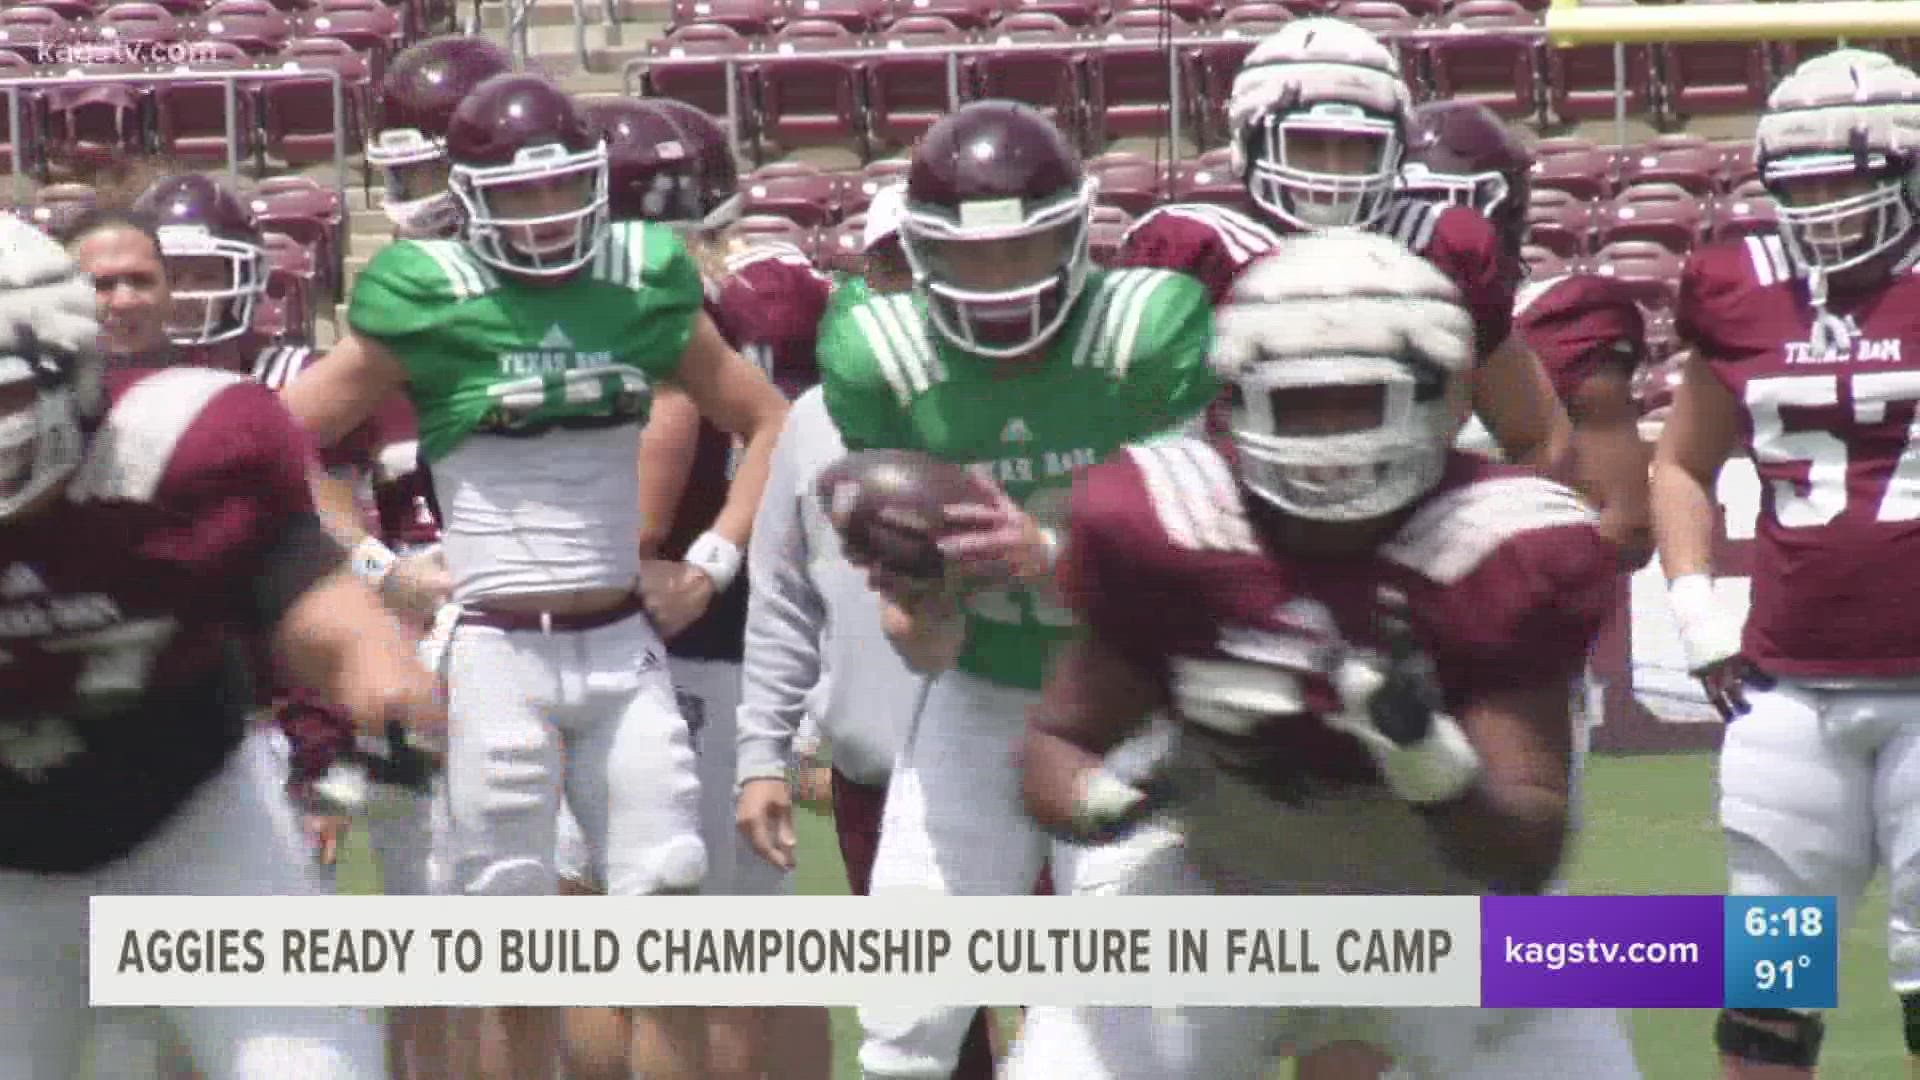 The A&M football team opens fall camp on Friday. The Aggies will give fans a sneak peak of the squad on Sunday when they host an open practice at Kyle Field